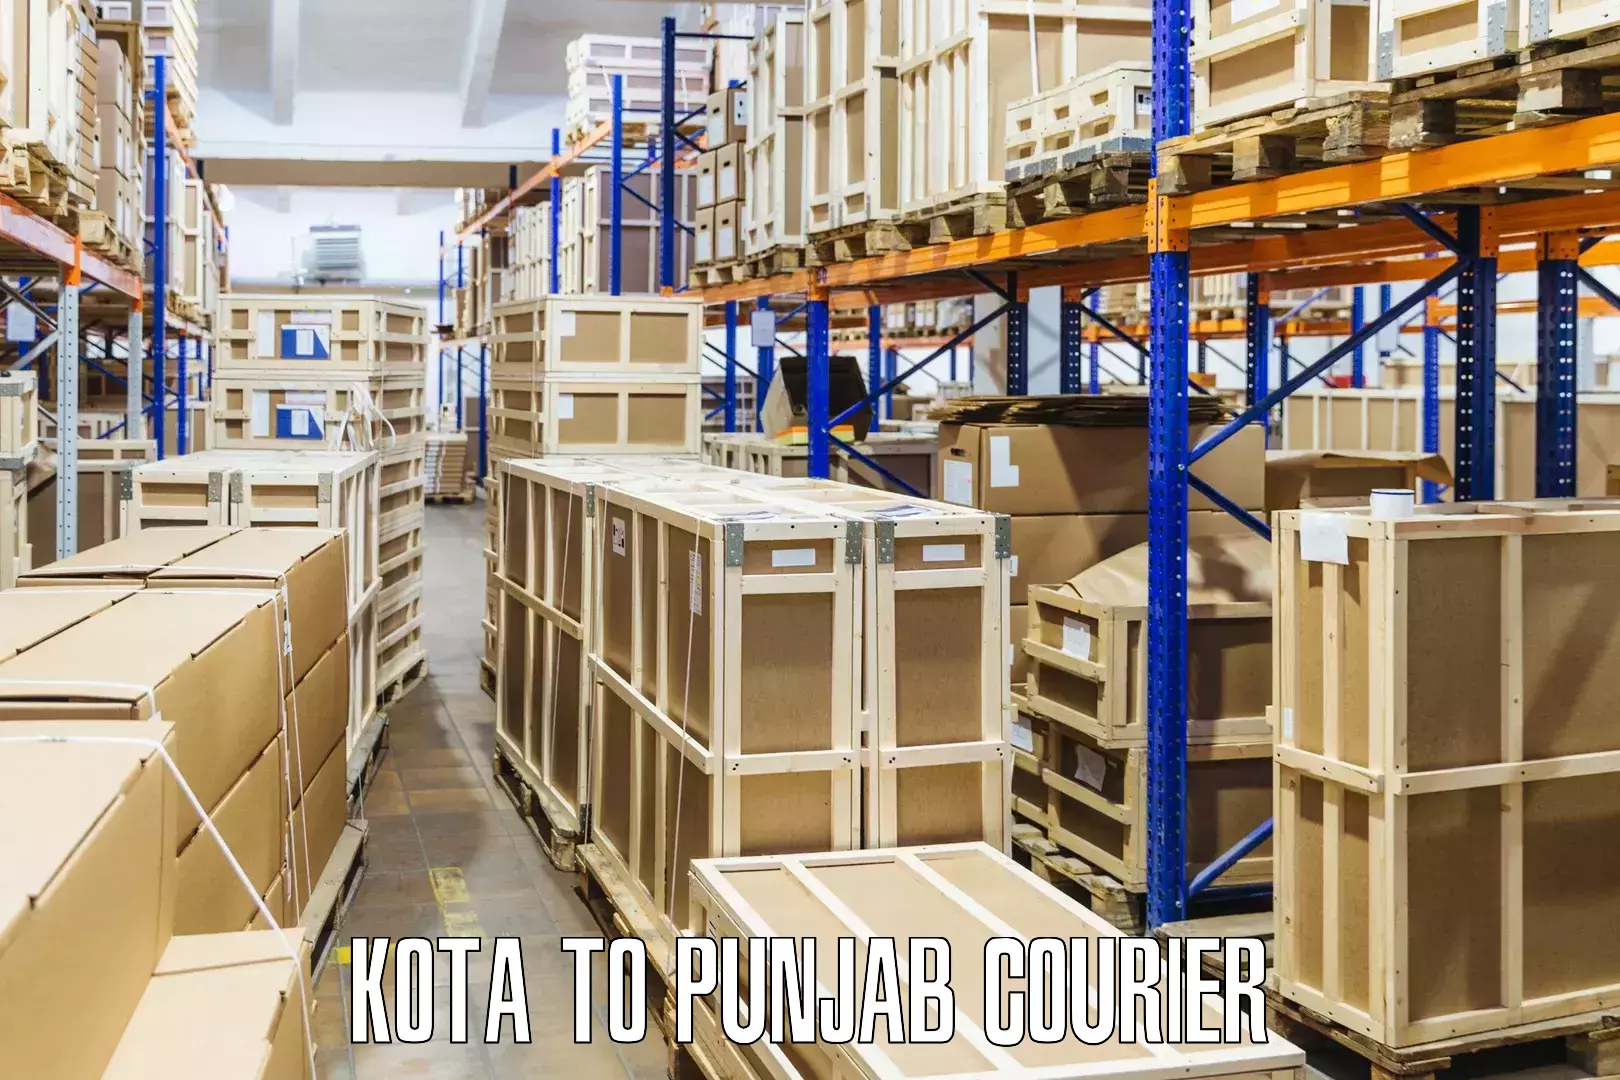 Nationwide courier service Kota to Dhilwan